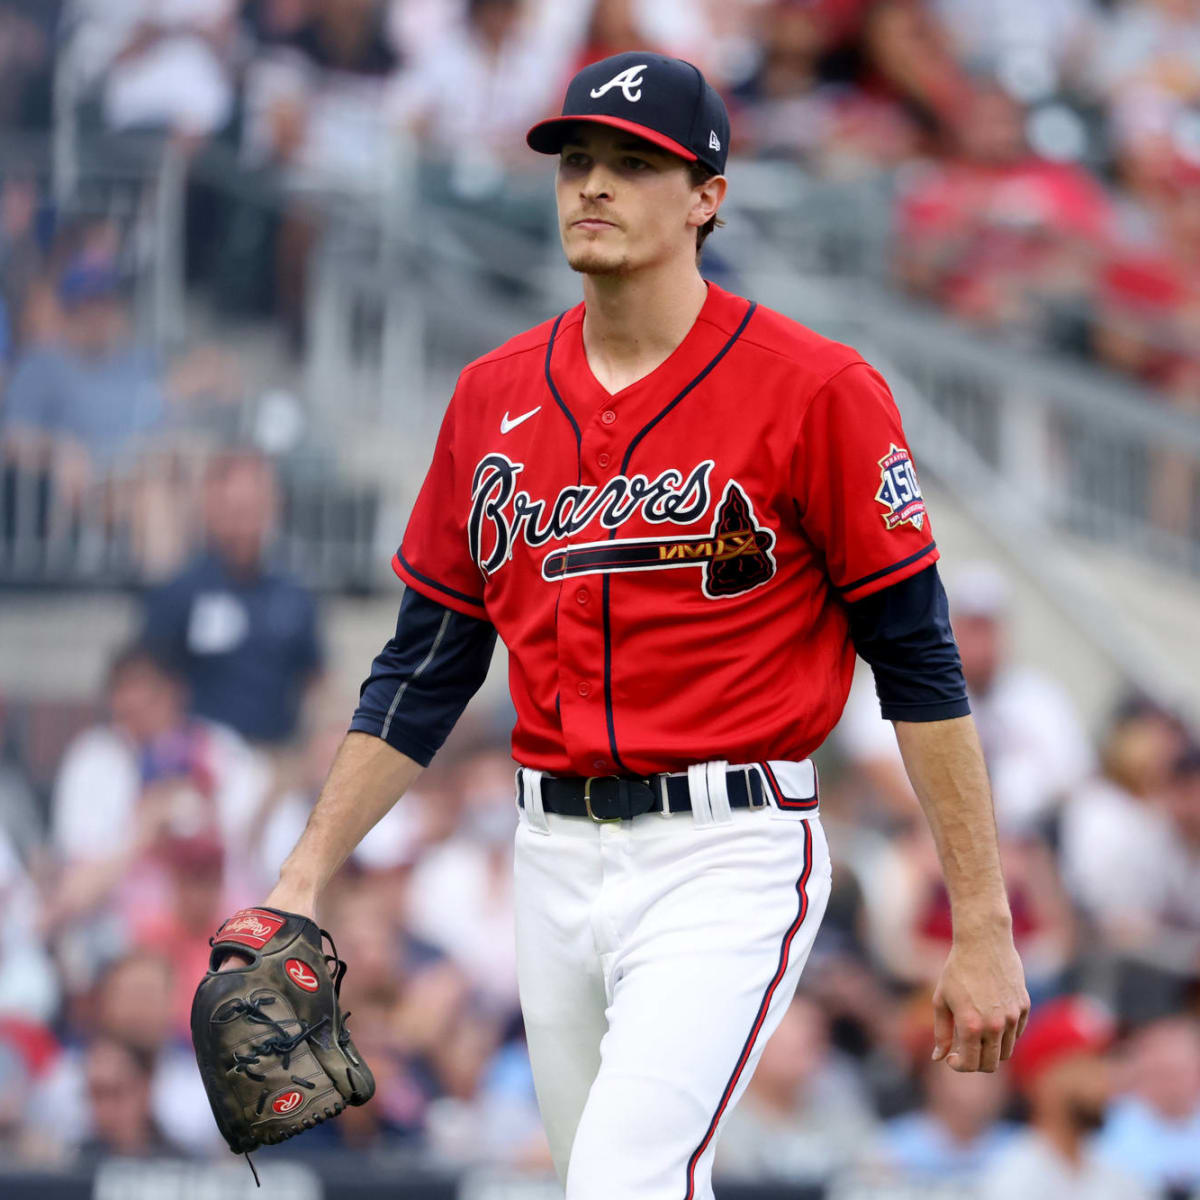 Bally Sports: Braves on X: Max Fried: I'm happy where I'm at right now.   I feel ready to go. Watch out, @MLB.  / X